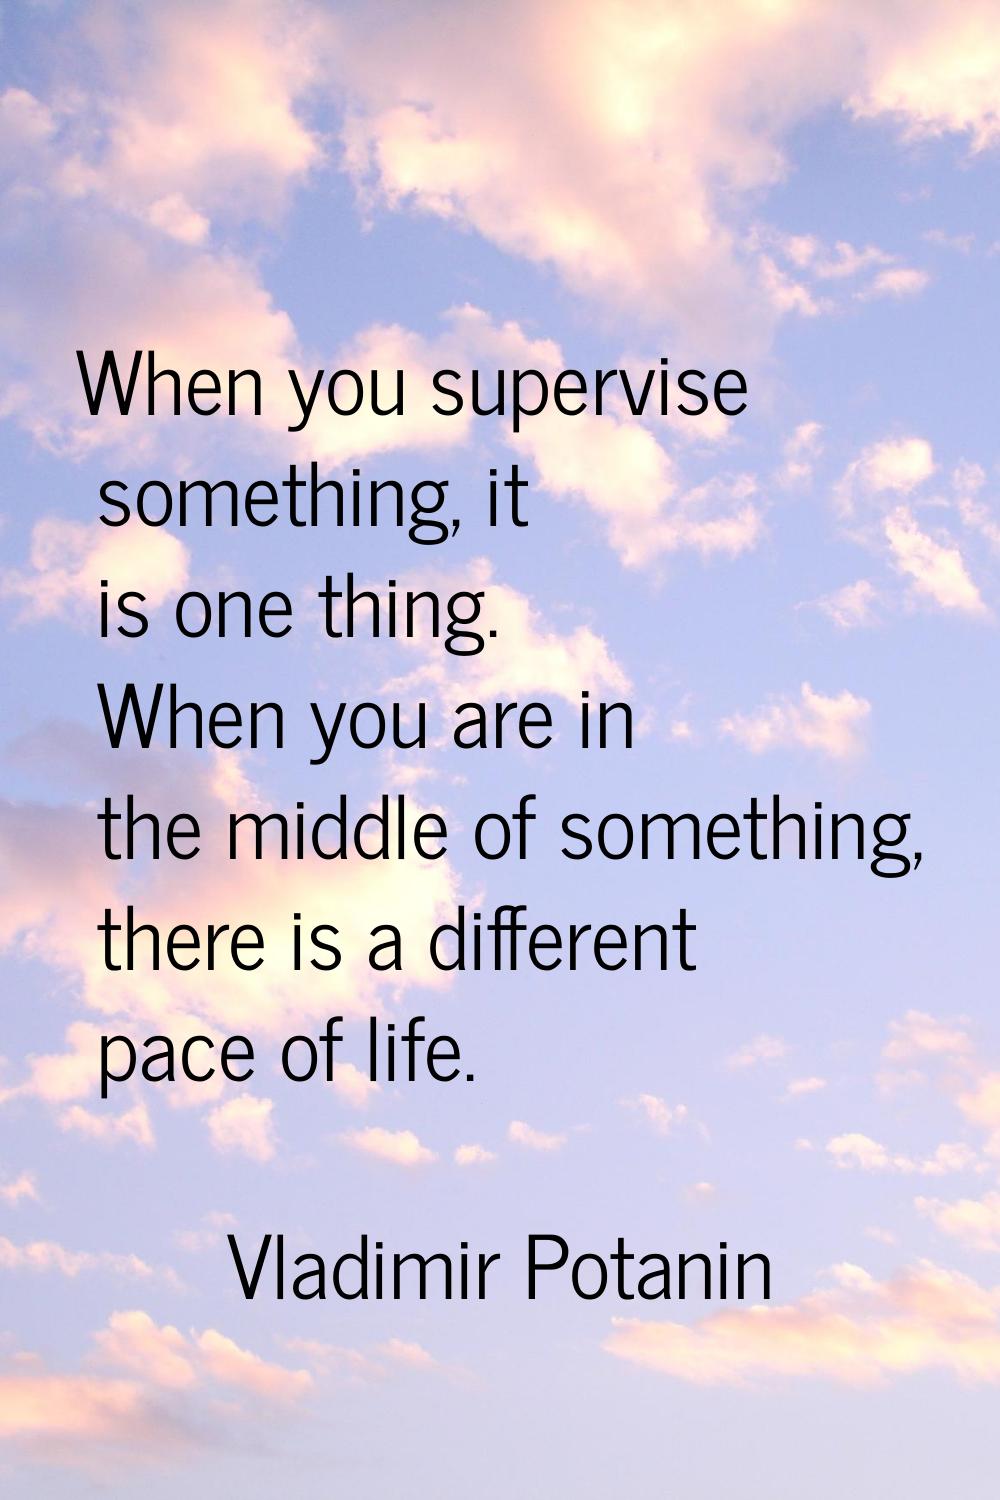 When you supervise something, it is one thing. When you are in the middle of something, there is a 